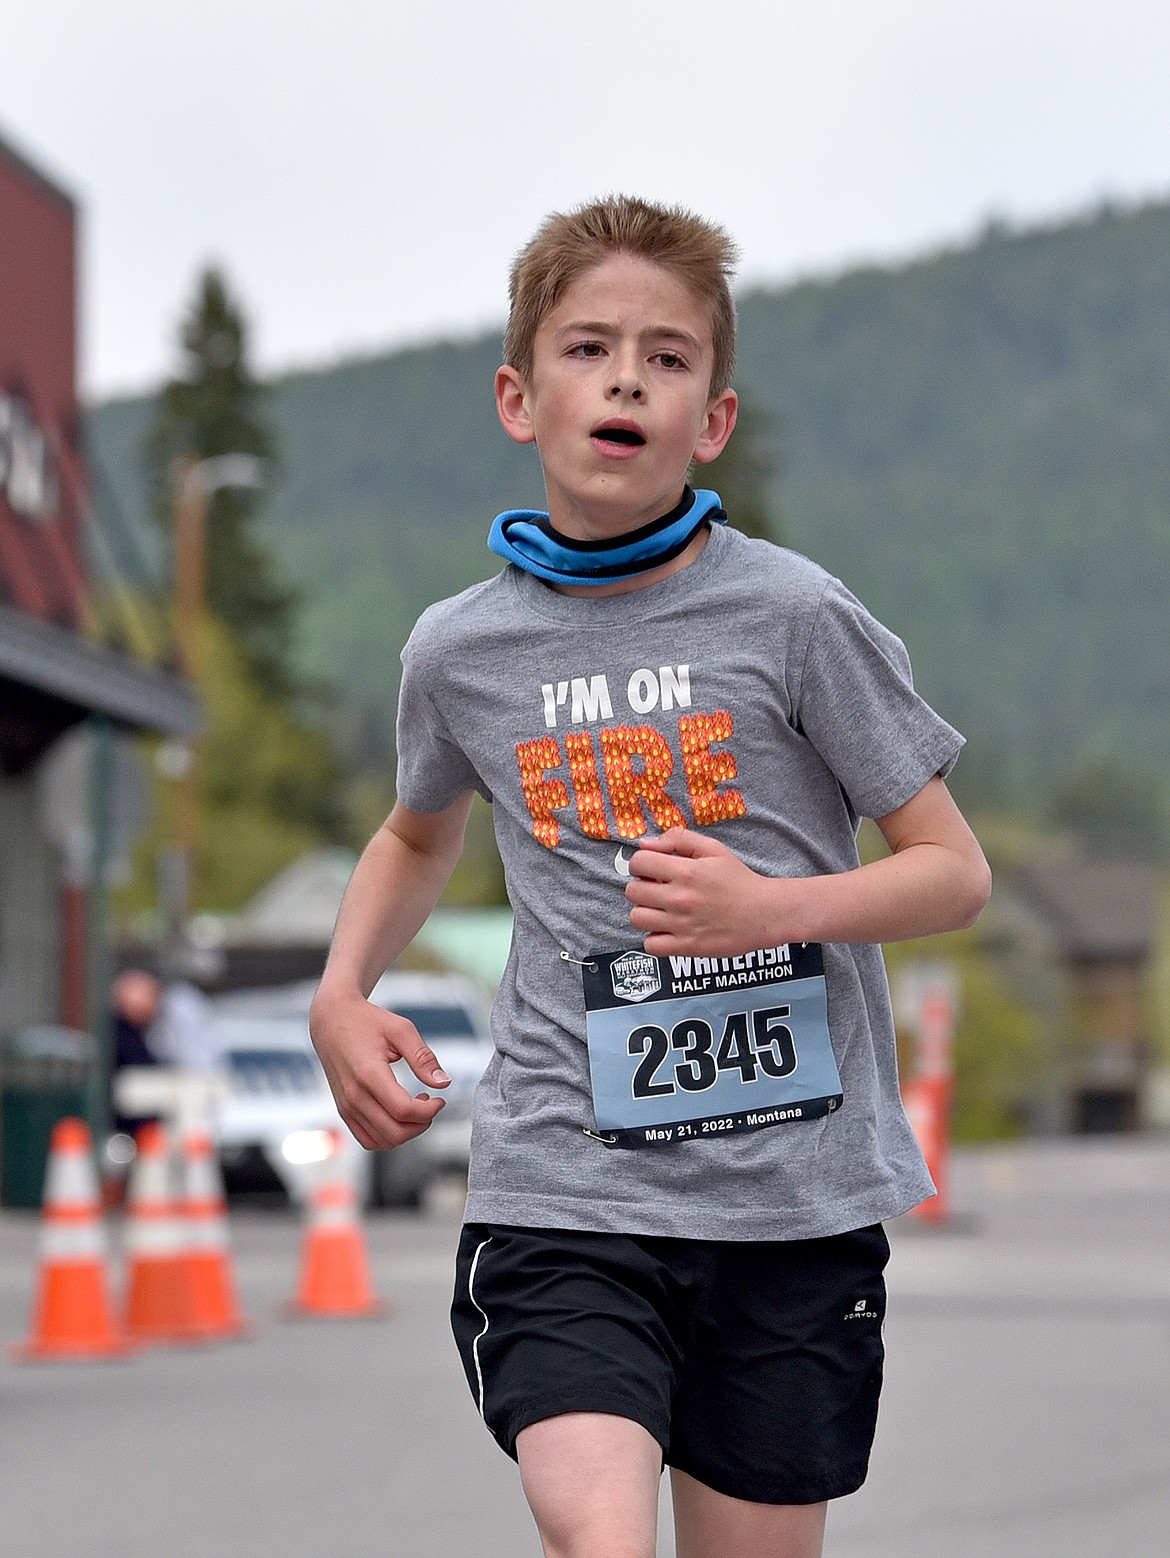 Carter Baum of Great Falls finishes first in the 12-19 age division in the Whitefish Half Marathon on Saturday. (Whitney England/Whitefish Pilot)